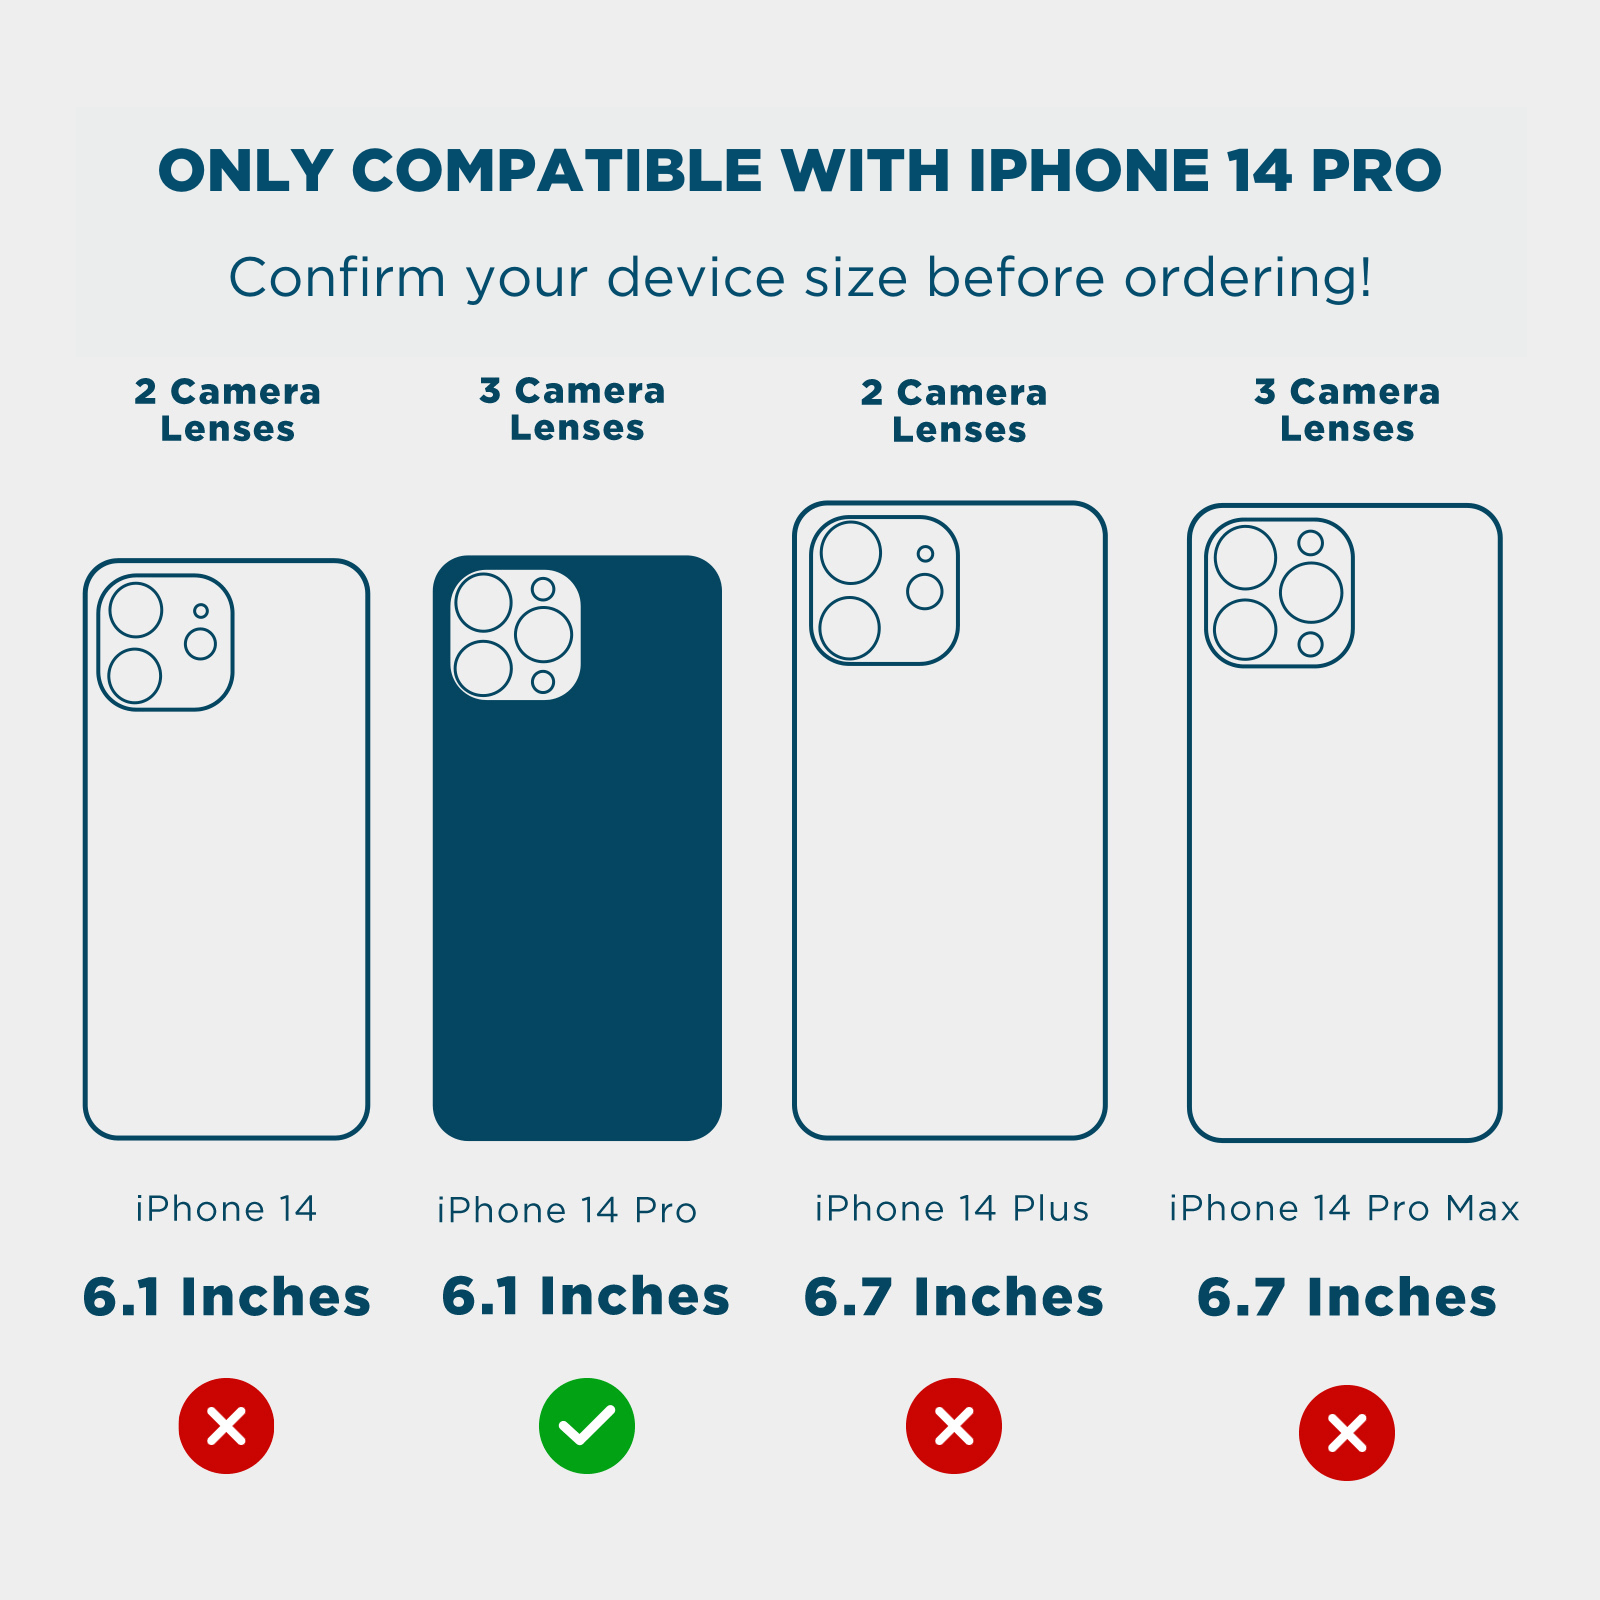 ONLY COMPATIBLE WITH IPHONE 14 PRO. CONFIRM YOUR DEVICE SIZE BEFORE ORDERING. 2 CAMERA LENSES, 3 CAMERA LENSES, 2 CAMERA LENSES, 3 CAMERA LENSES, 6.1, 6.1, 6.7, 6.7. COLOR::CLEAR